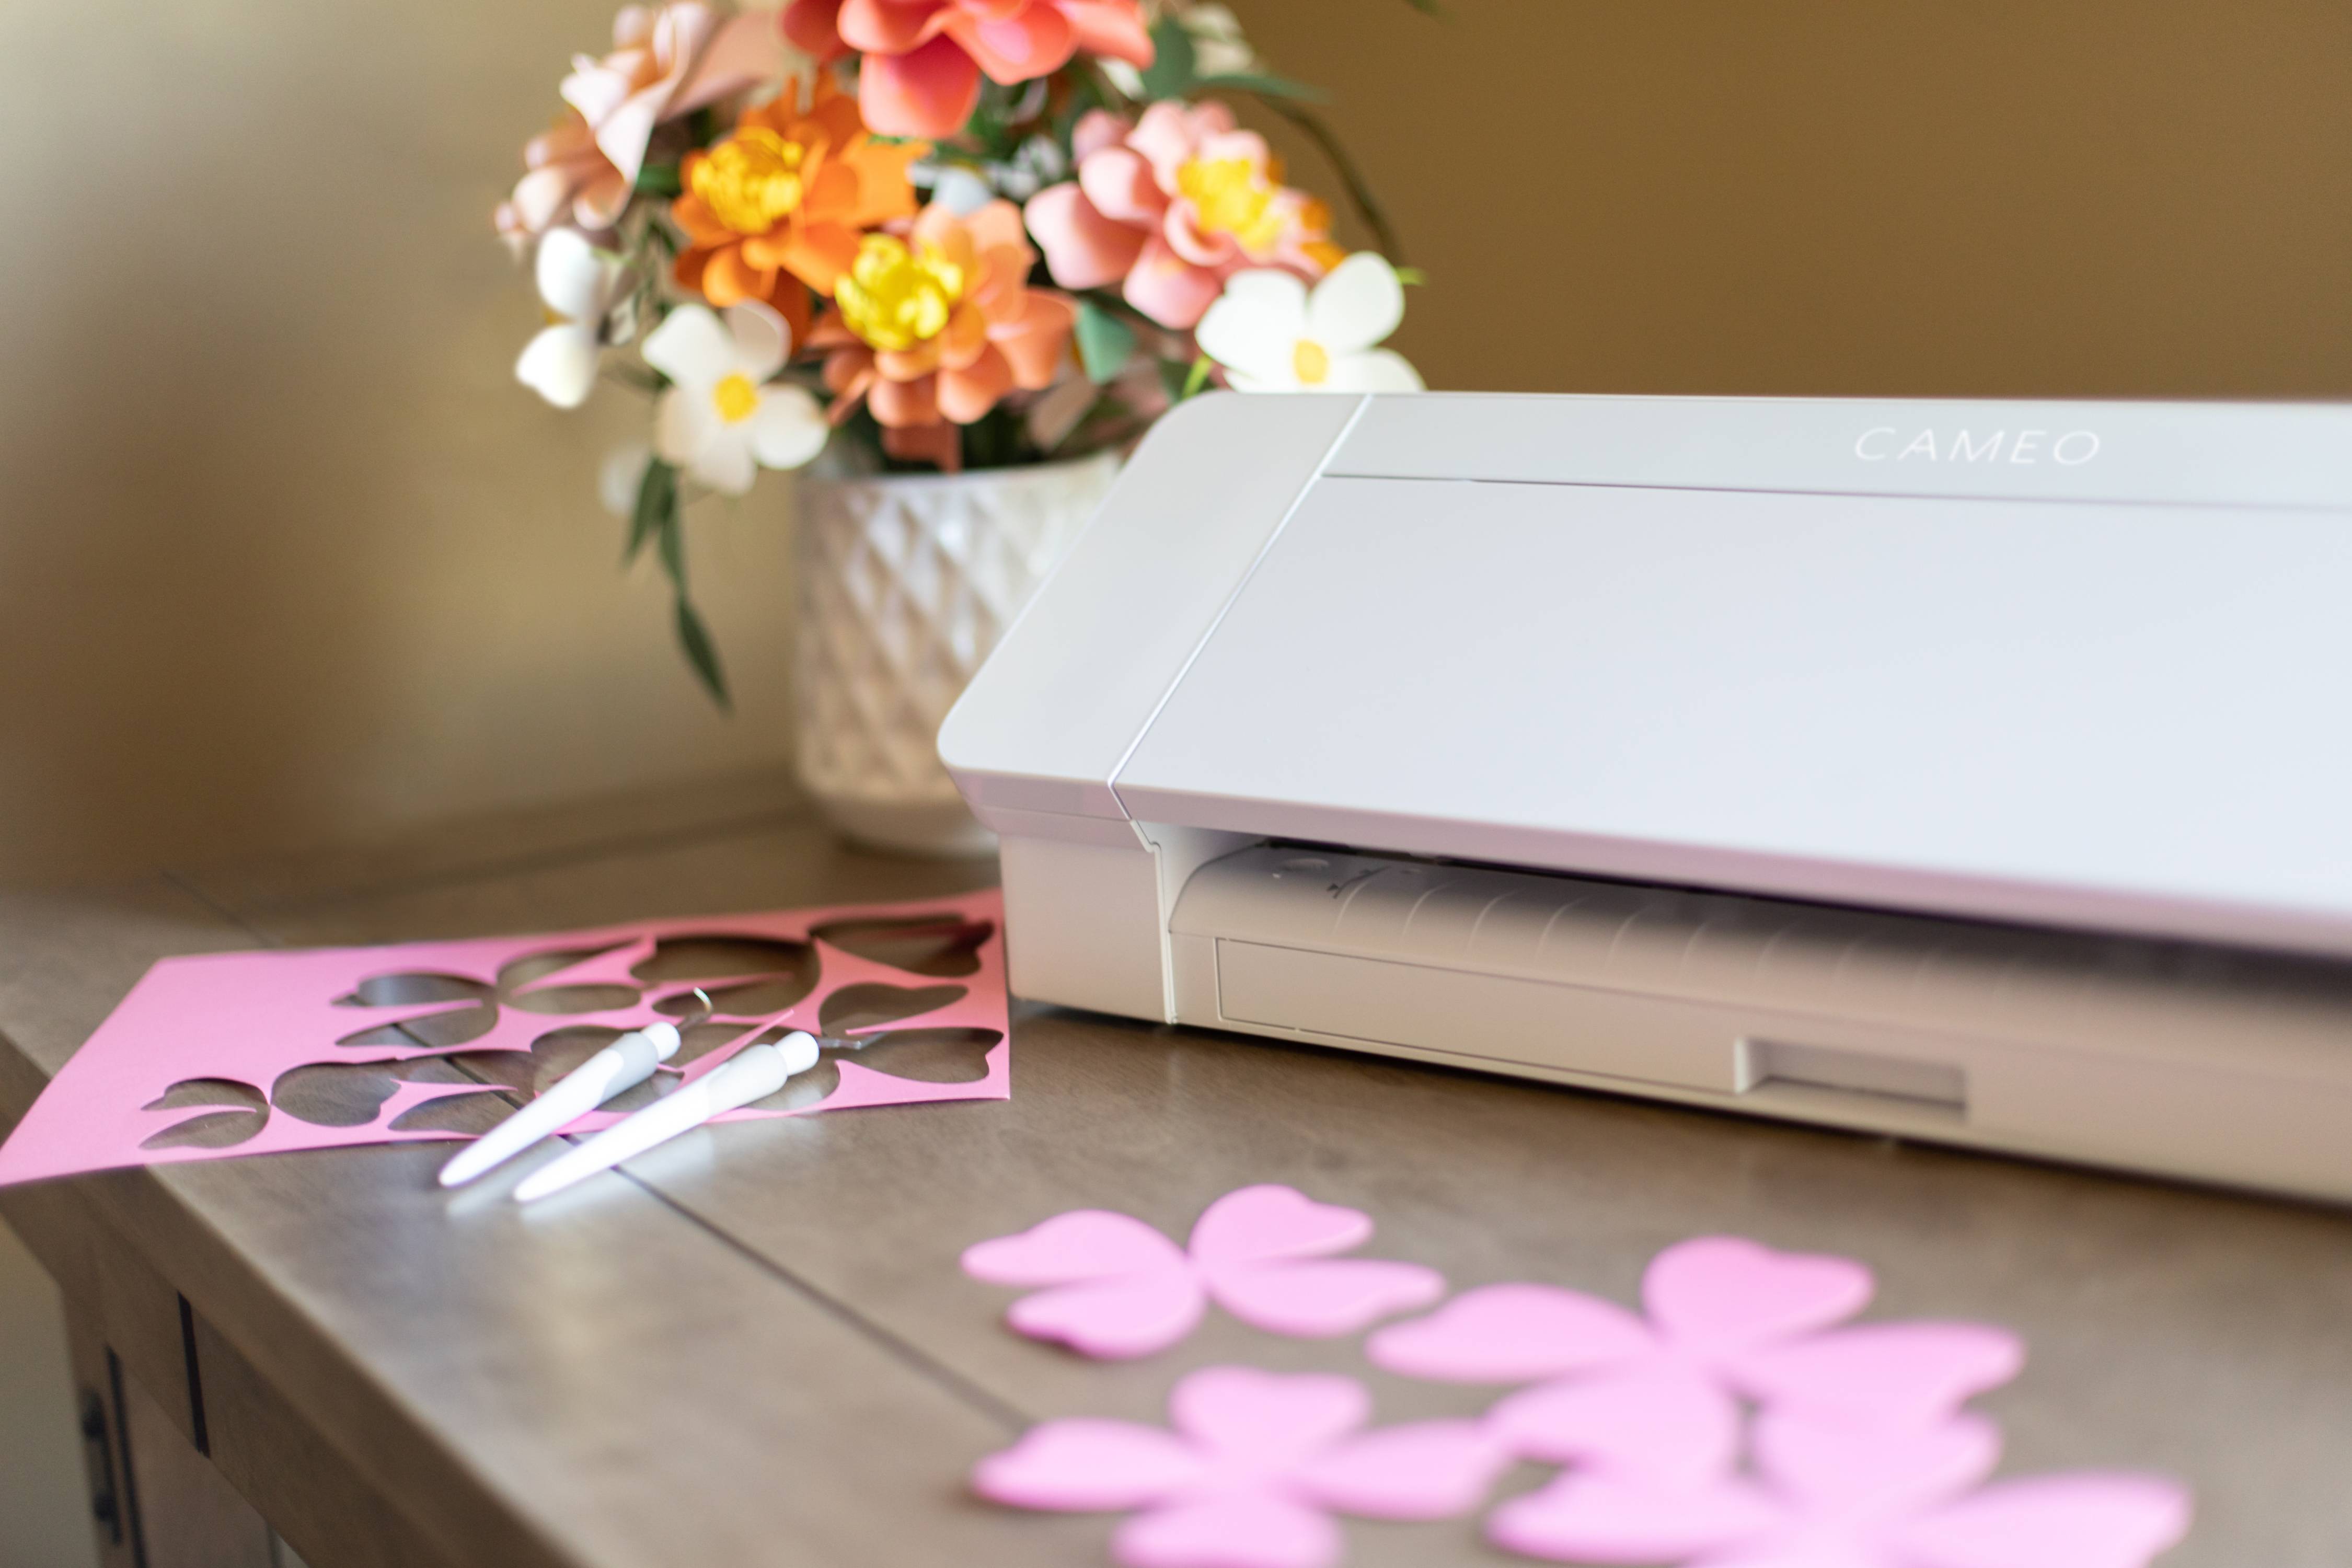 Silhouette Cameo 4 Electronic Cutter - image 4 of 8